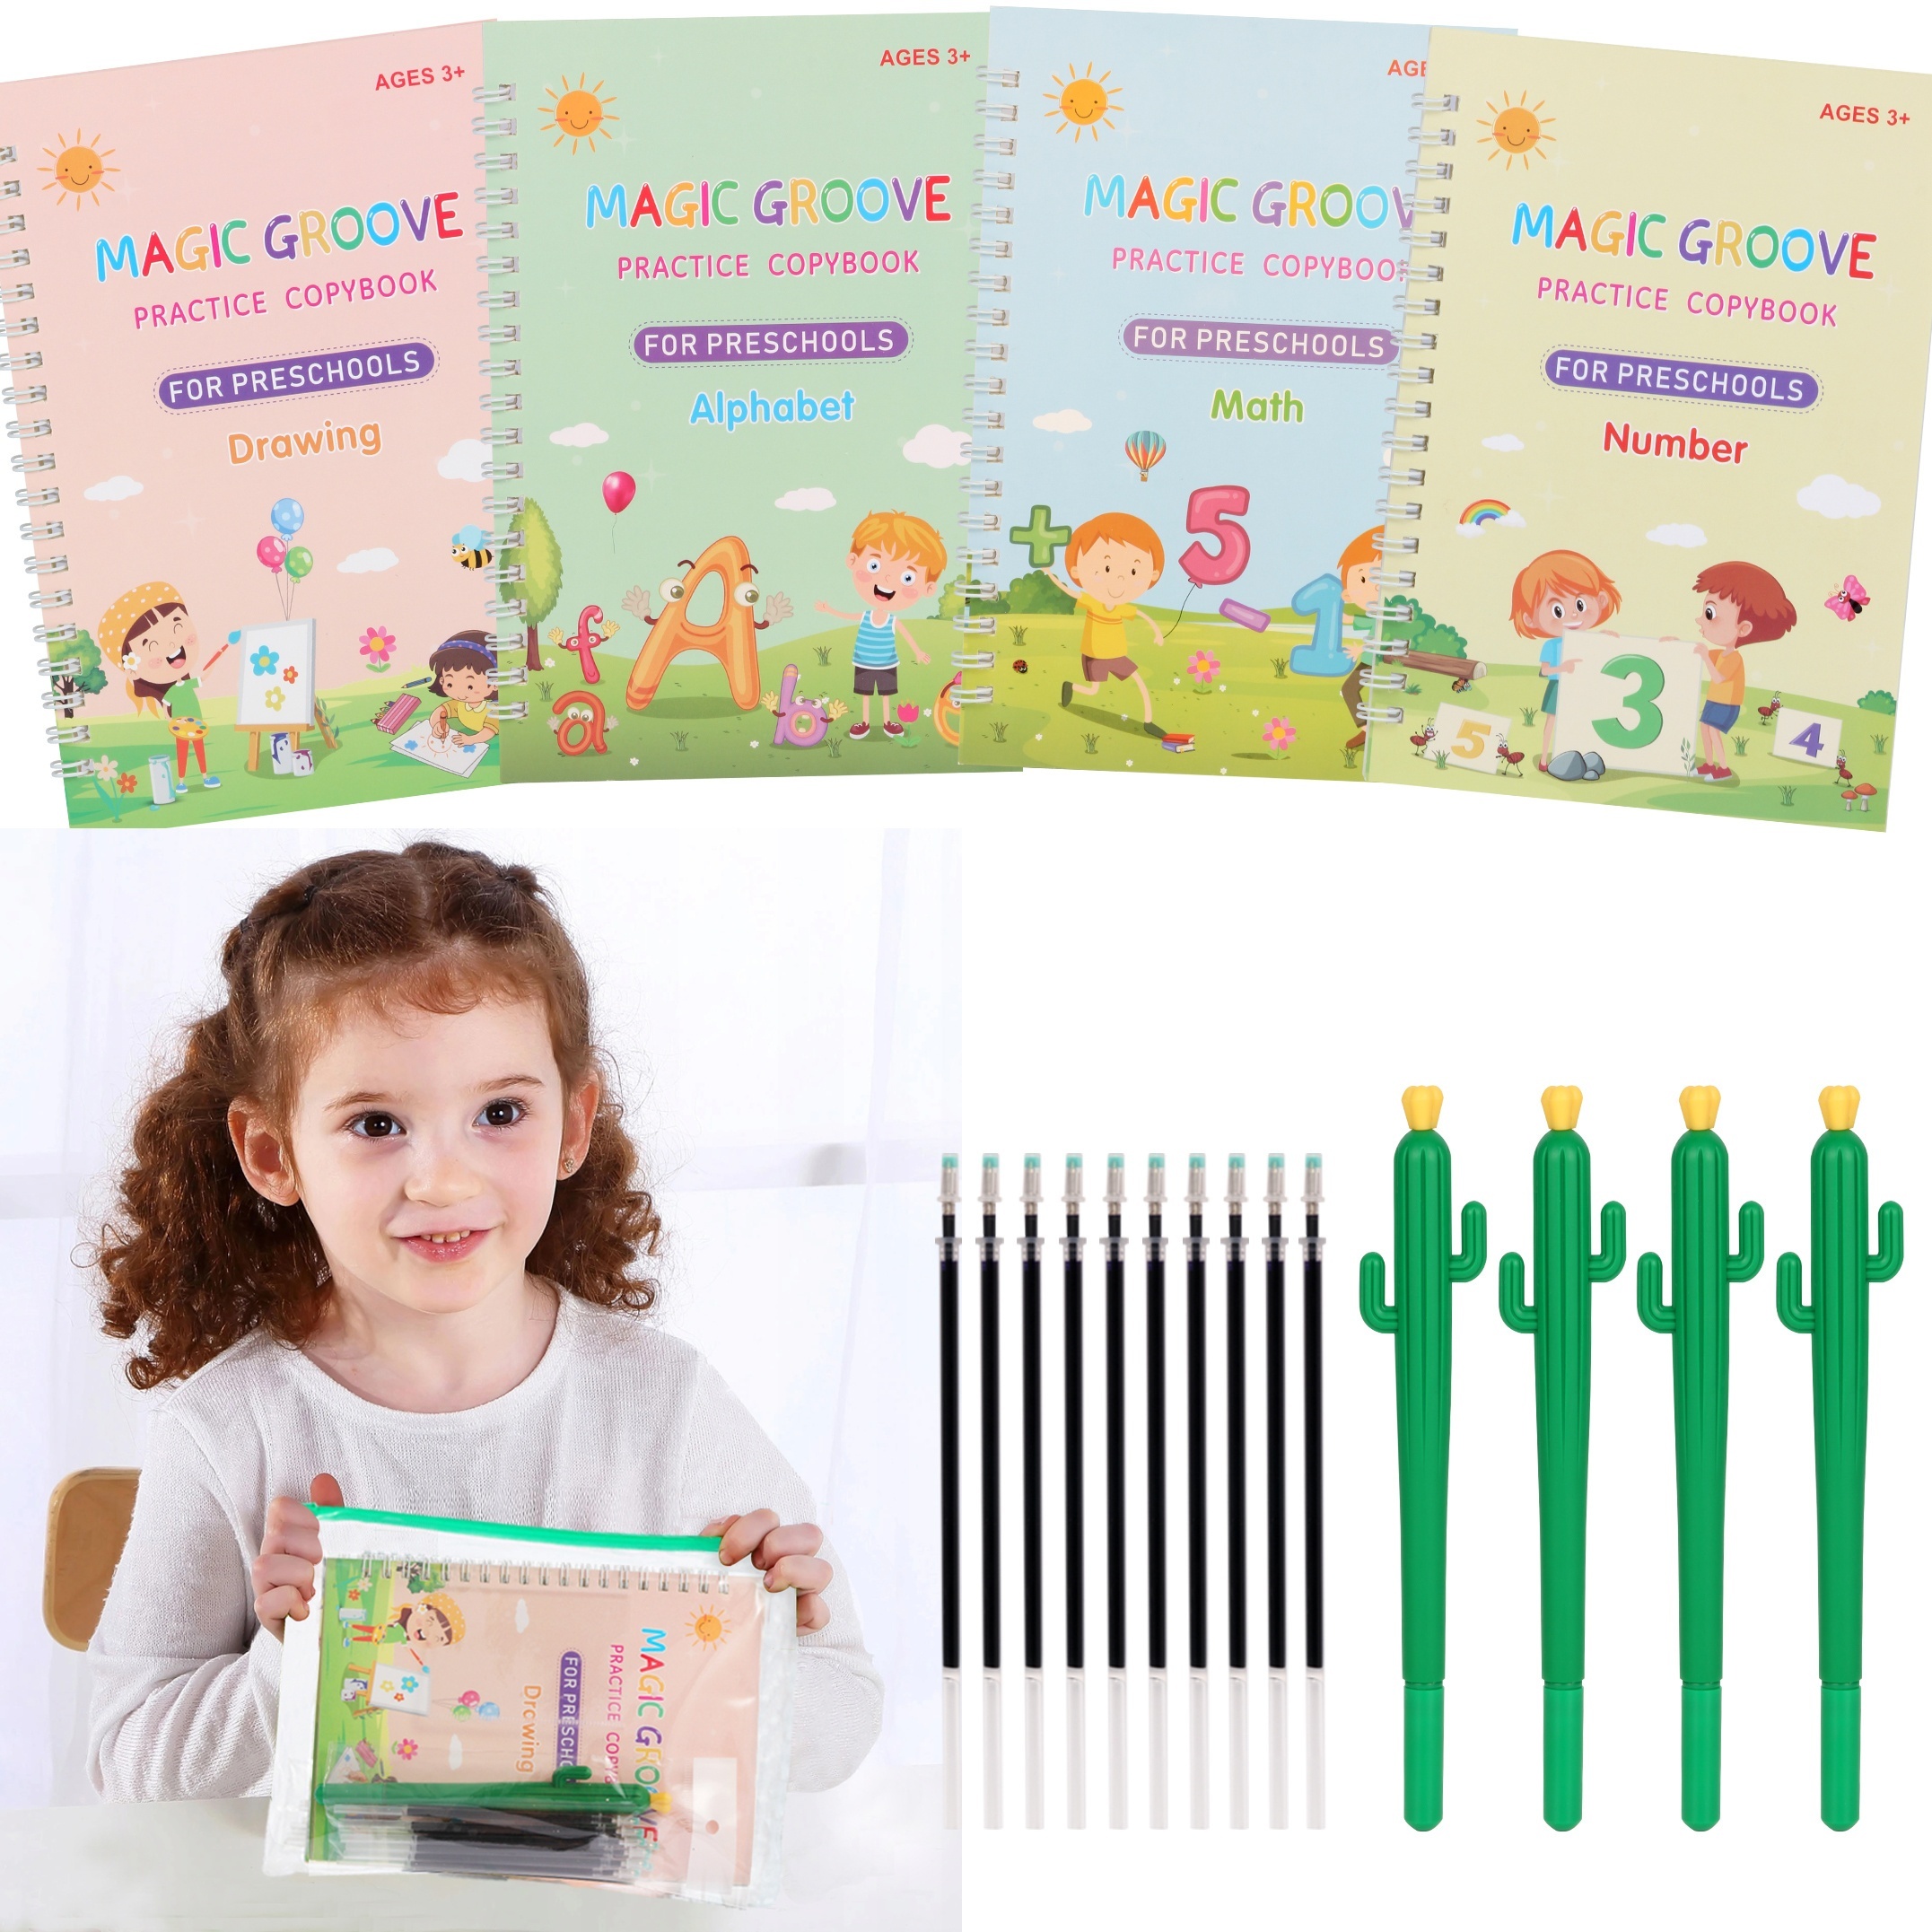 Reusable Magic Practice Copybook - Handwriting Practice for Kids 3-8,  Groovd Writing Workbooks, Learning Handwriting Tools Kit and Magical Pen  Refills